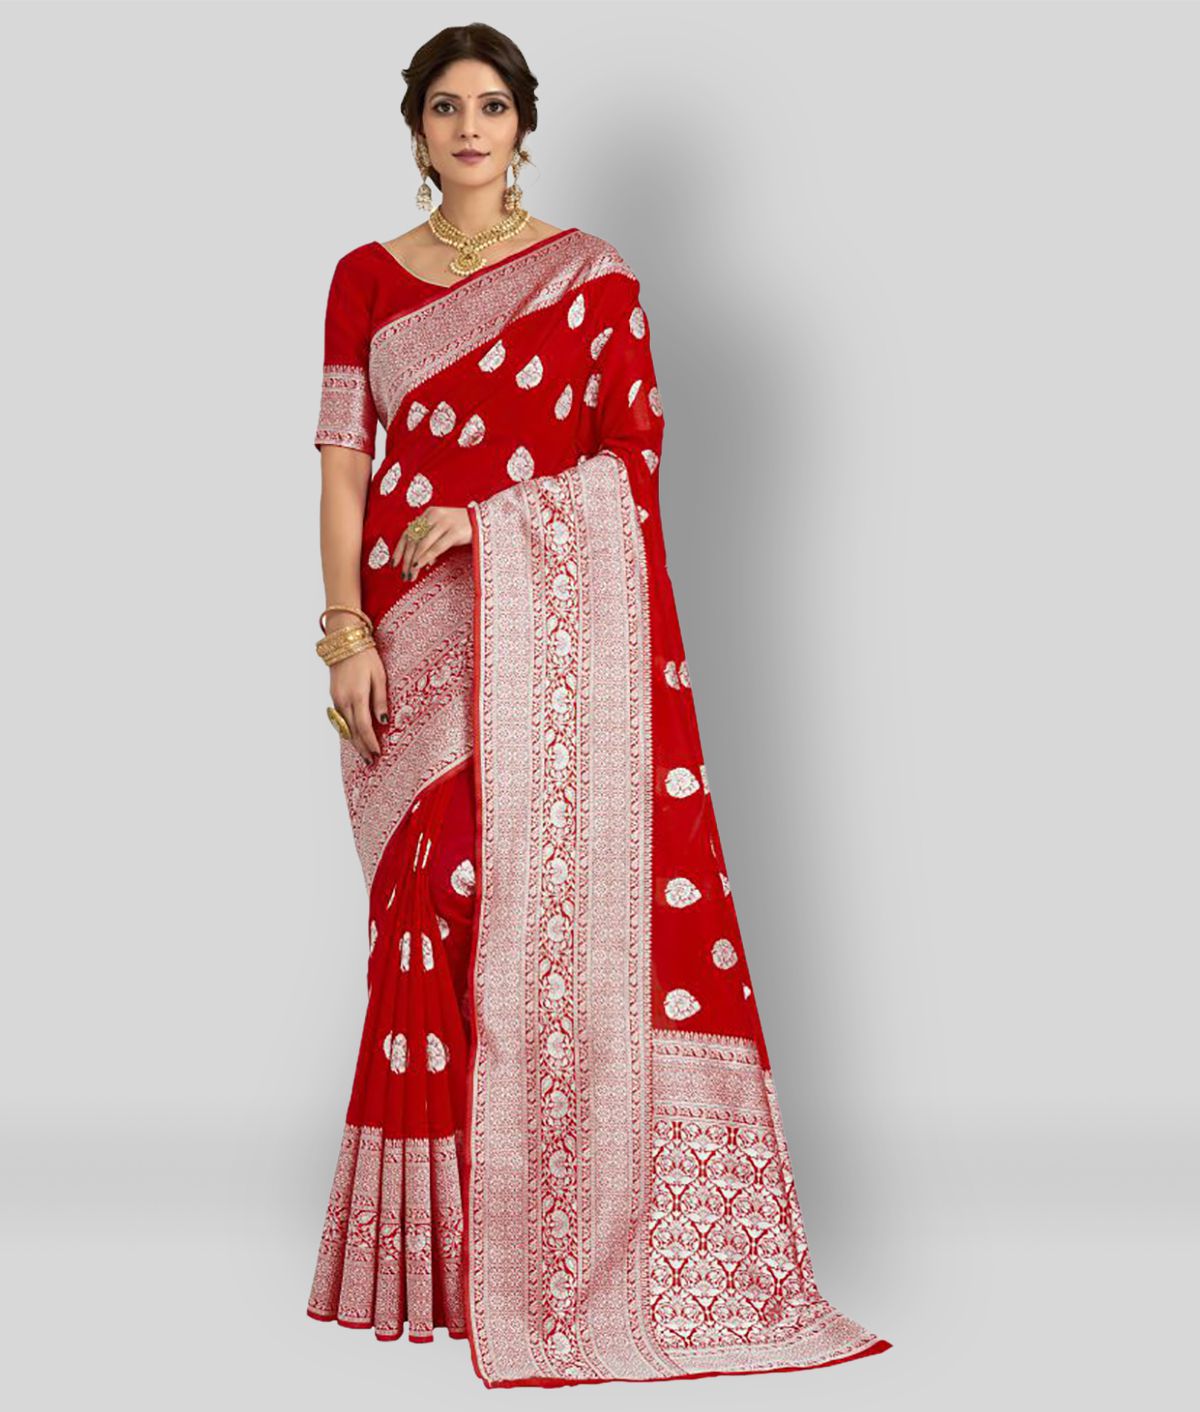     			Sherine - Red Jacquard Saree With Blouse Piece (Pack of 1)